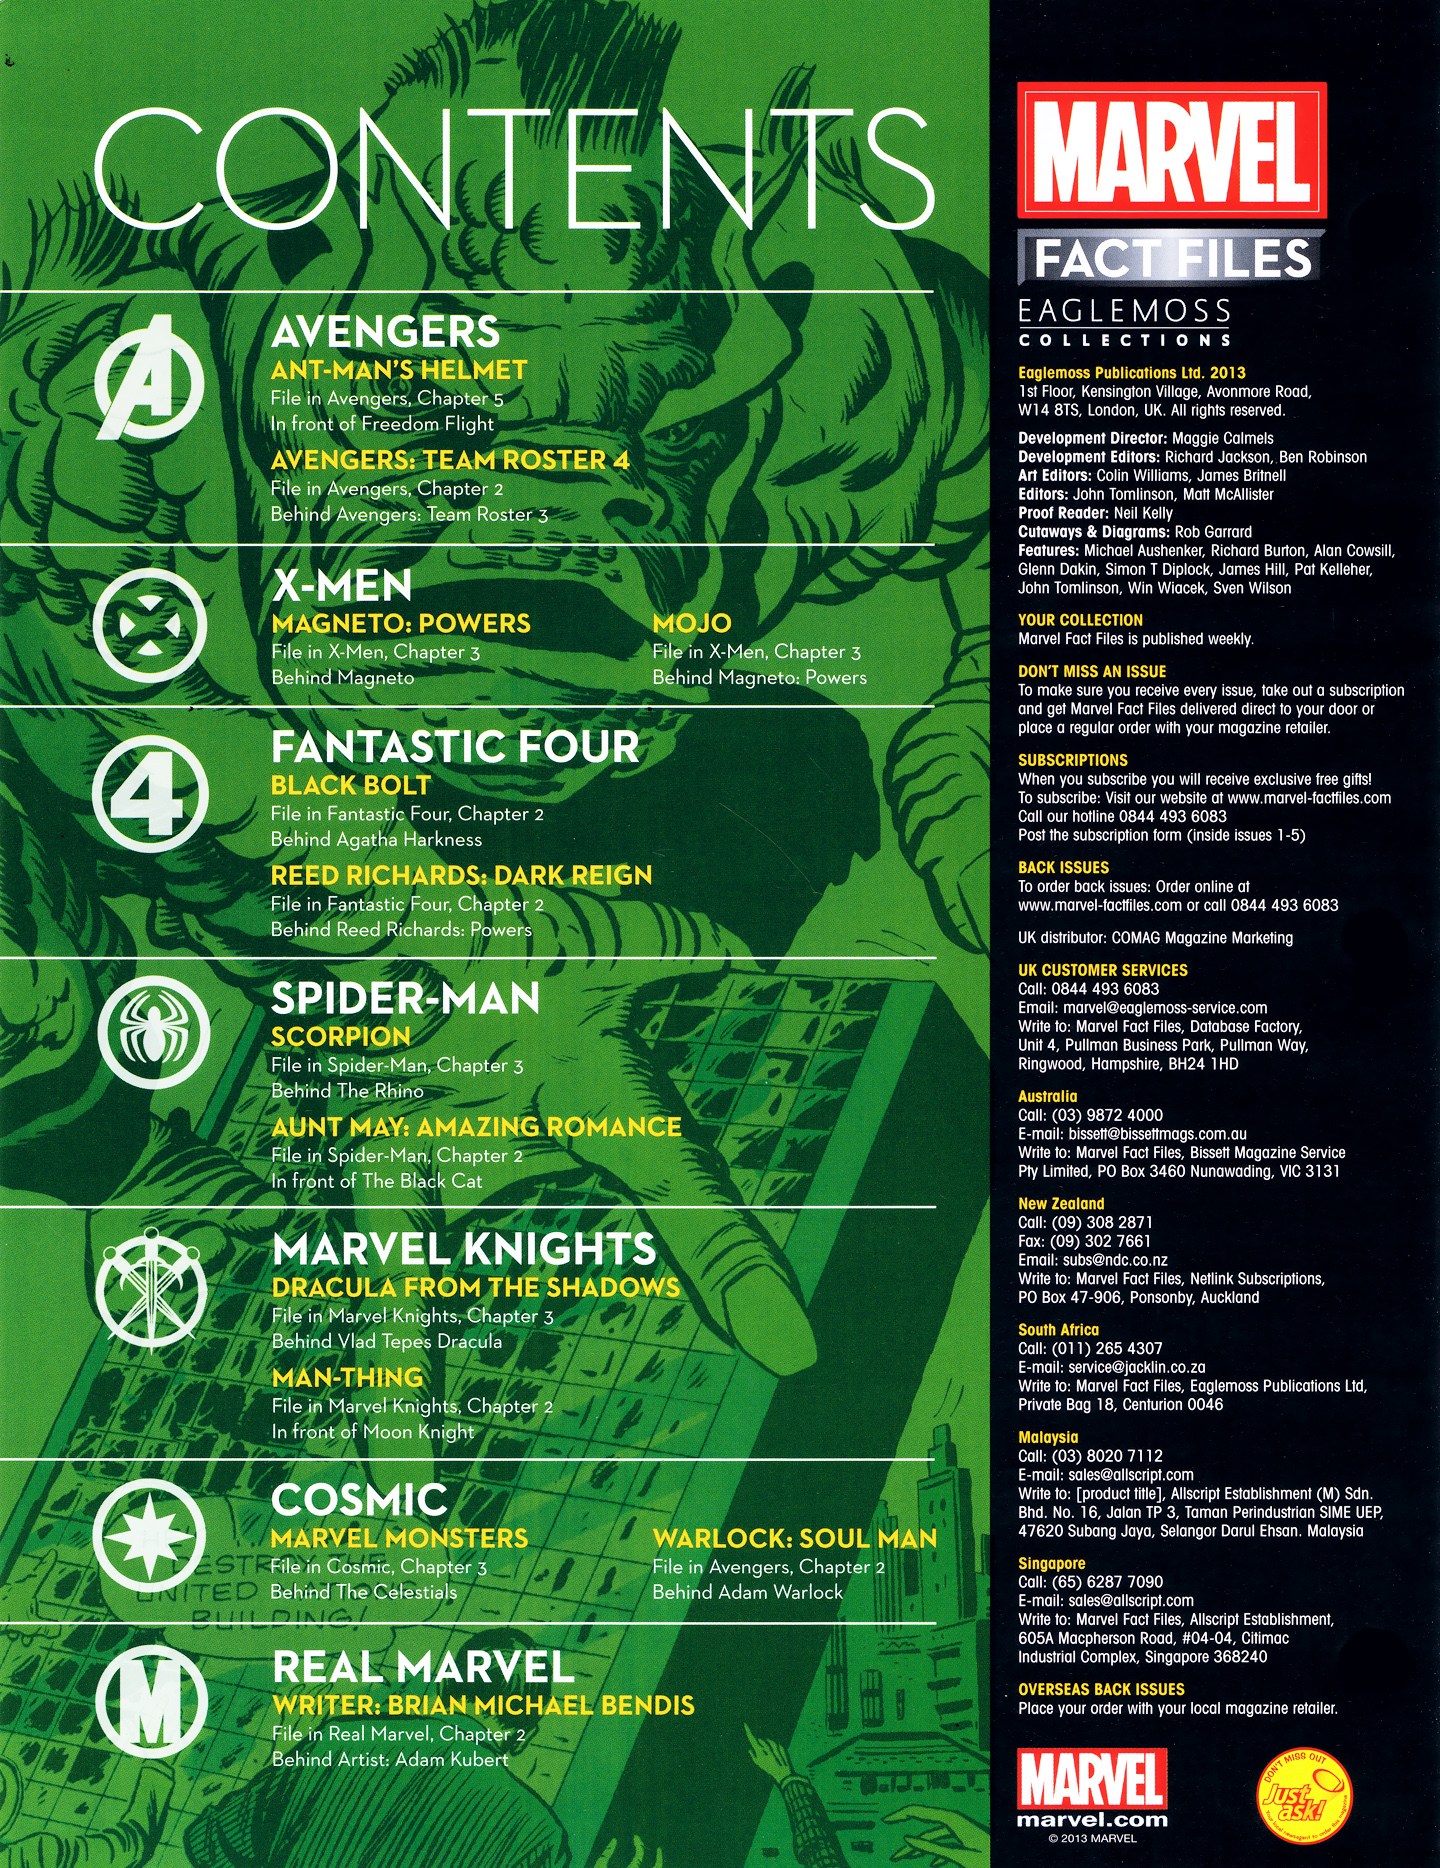 Read online Marvel Fact Files comic -  Issue #31 - 3